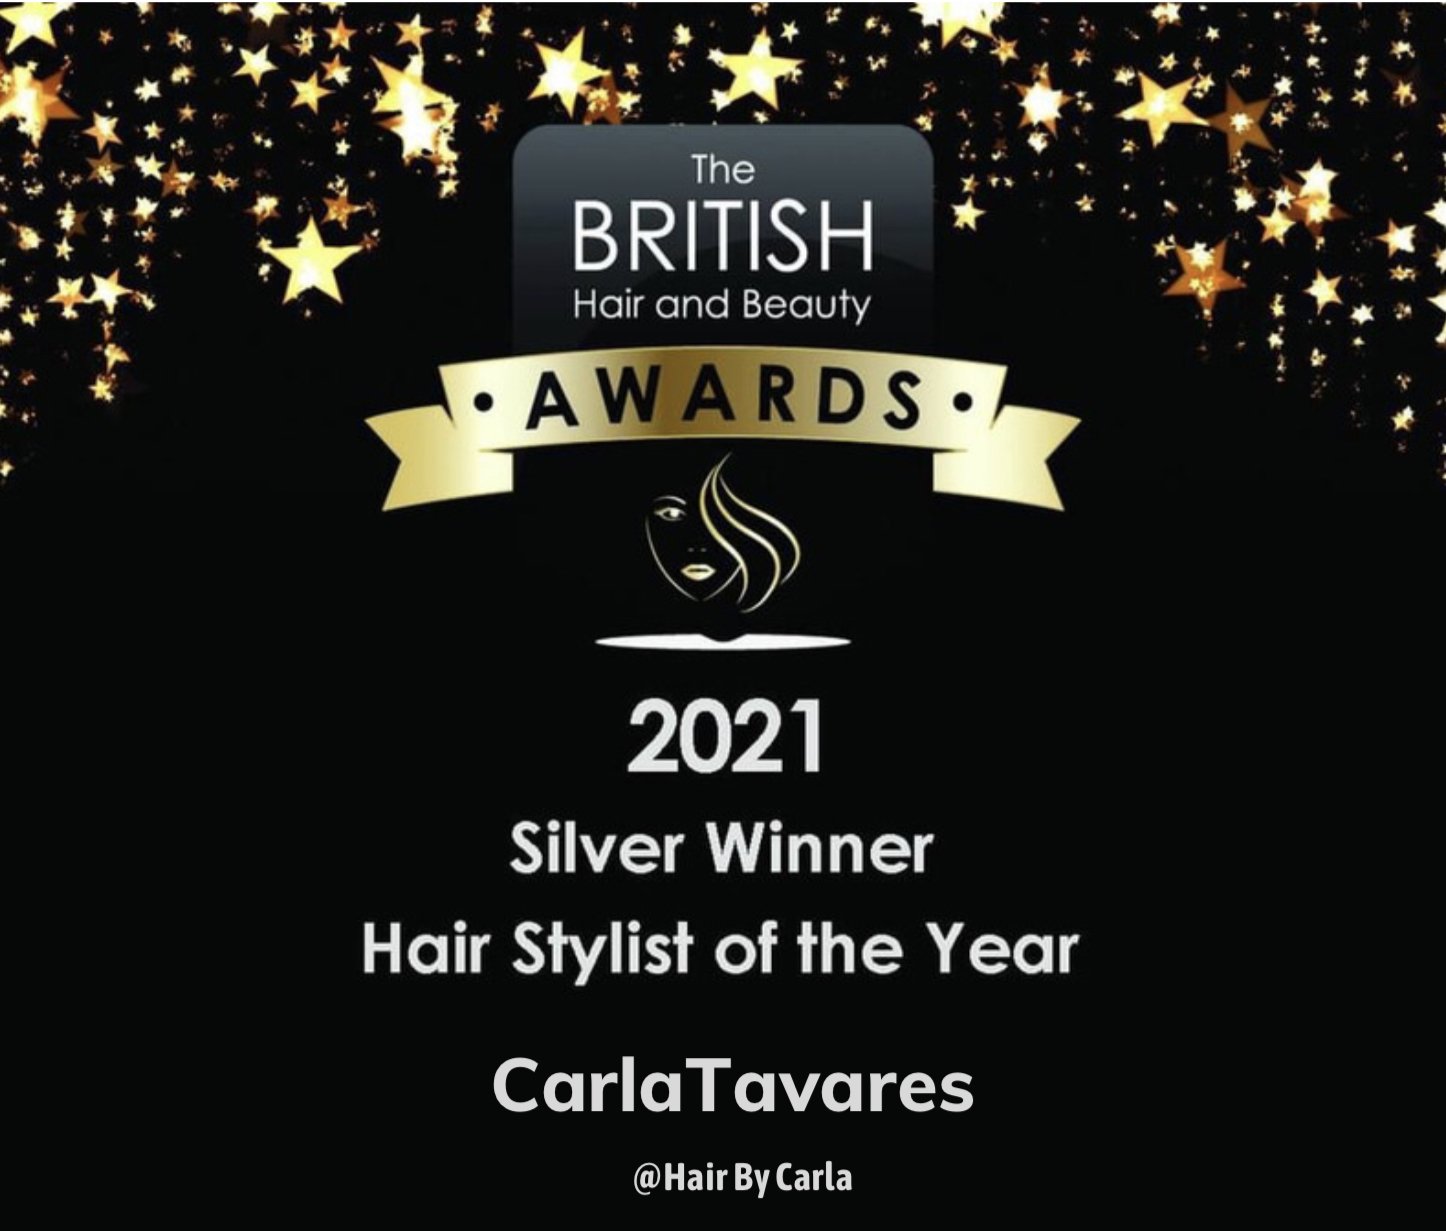 The BRITISH Hair and Beauty Awards